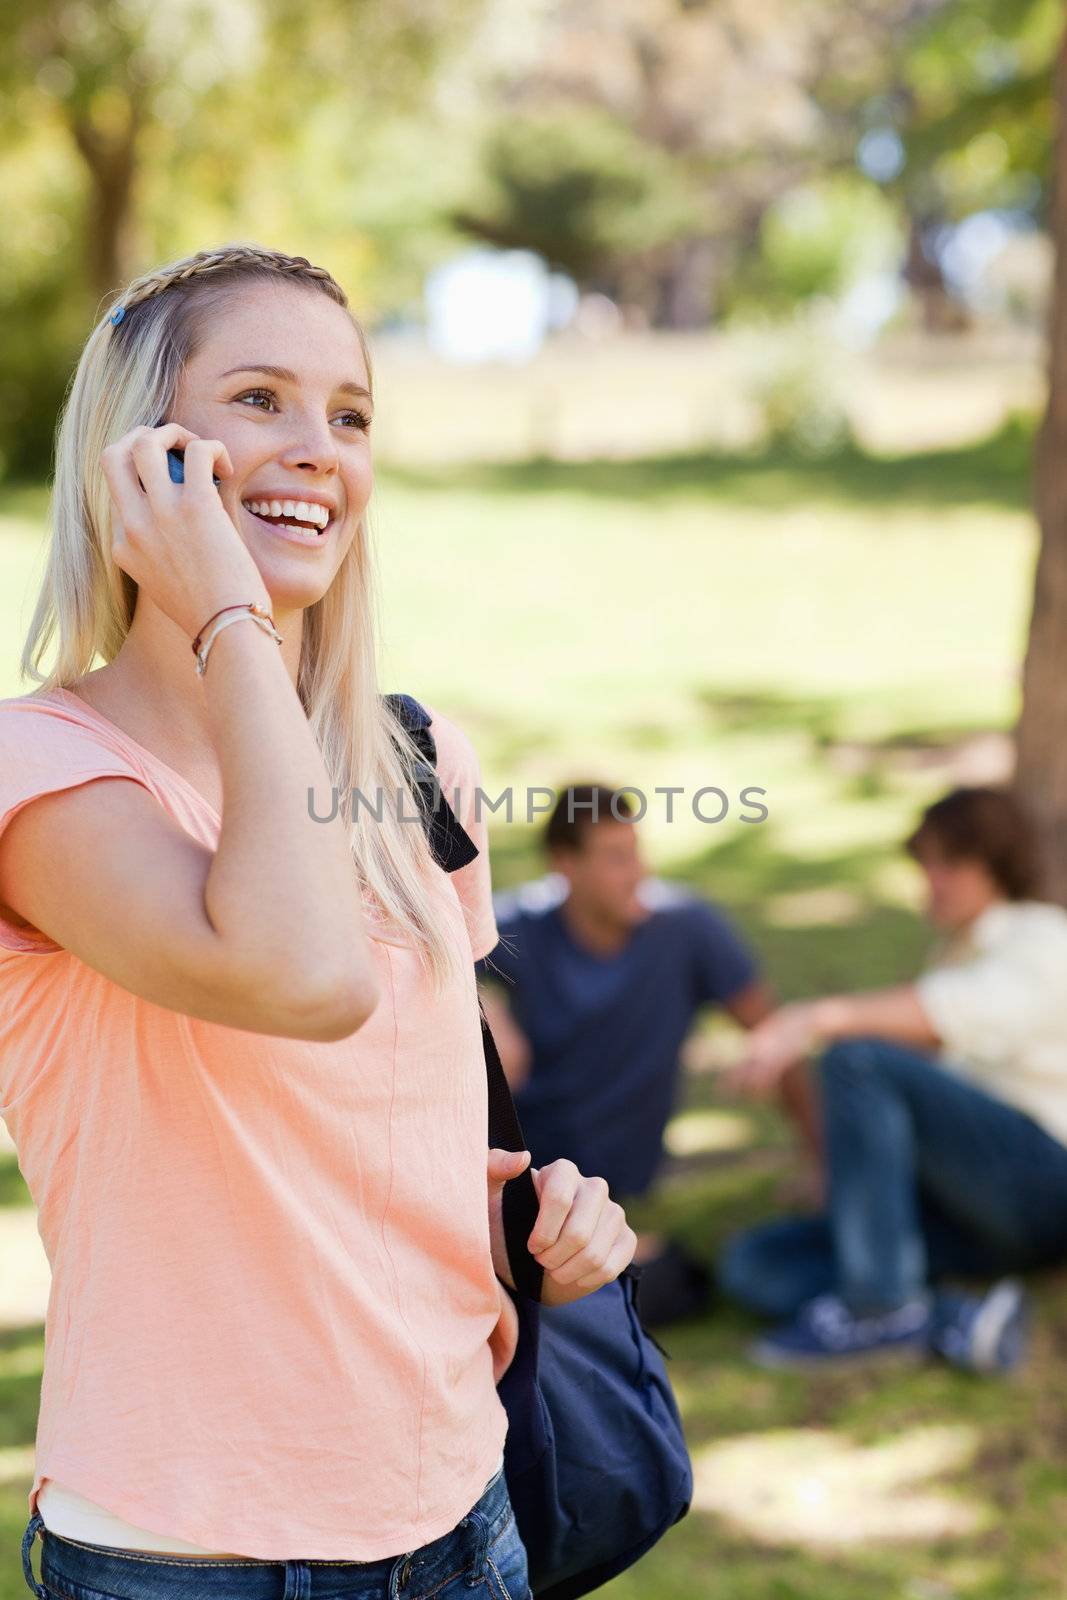 Teenager on the phone in a park with friends in background